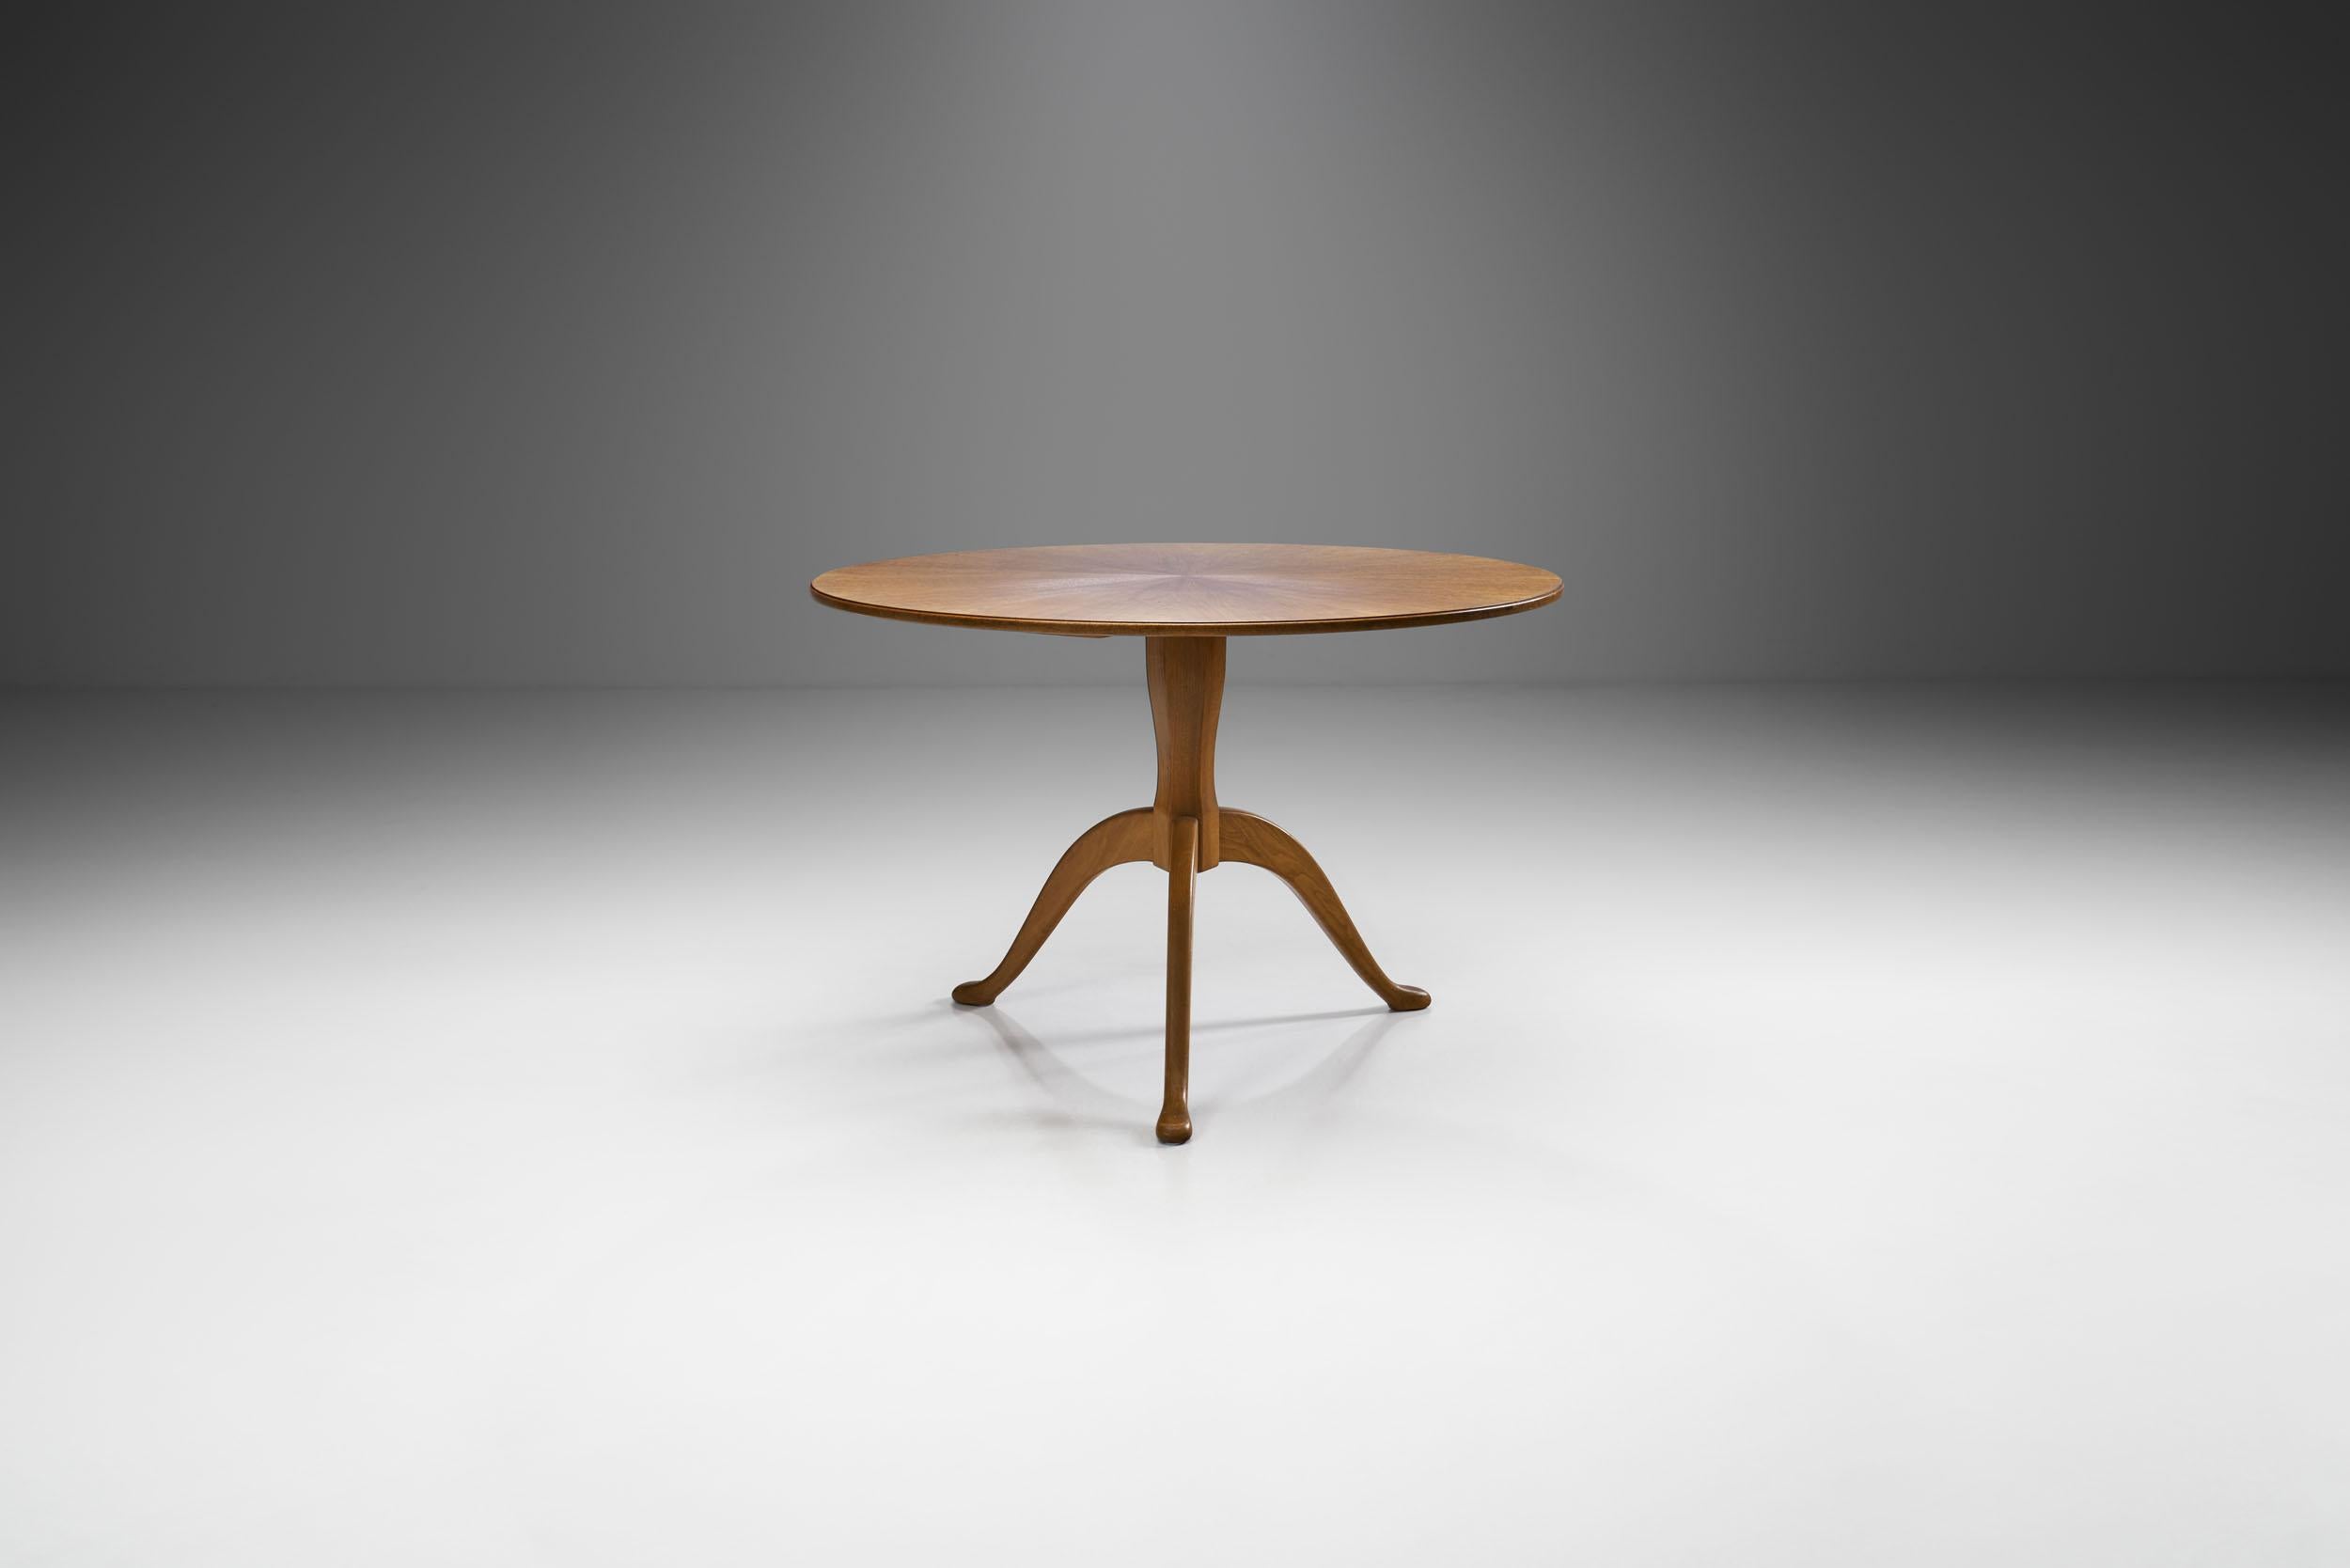 All edges are thoroughly broken, Carl Malmsten often wrote in his drawings. It was nature that was his great source of inspiration and in nature there are hardly any sharp edges or corners. This “Berg” table, designed in 1936, is one of the greatest